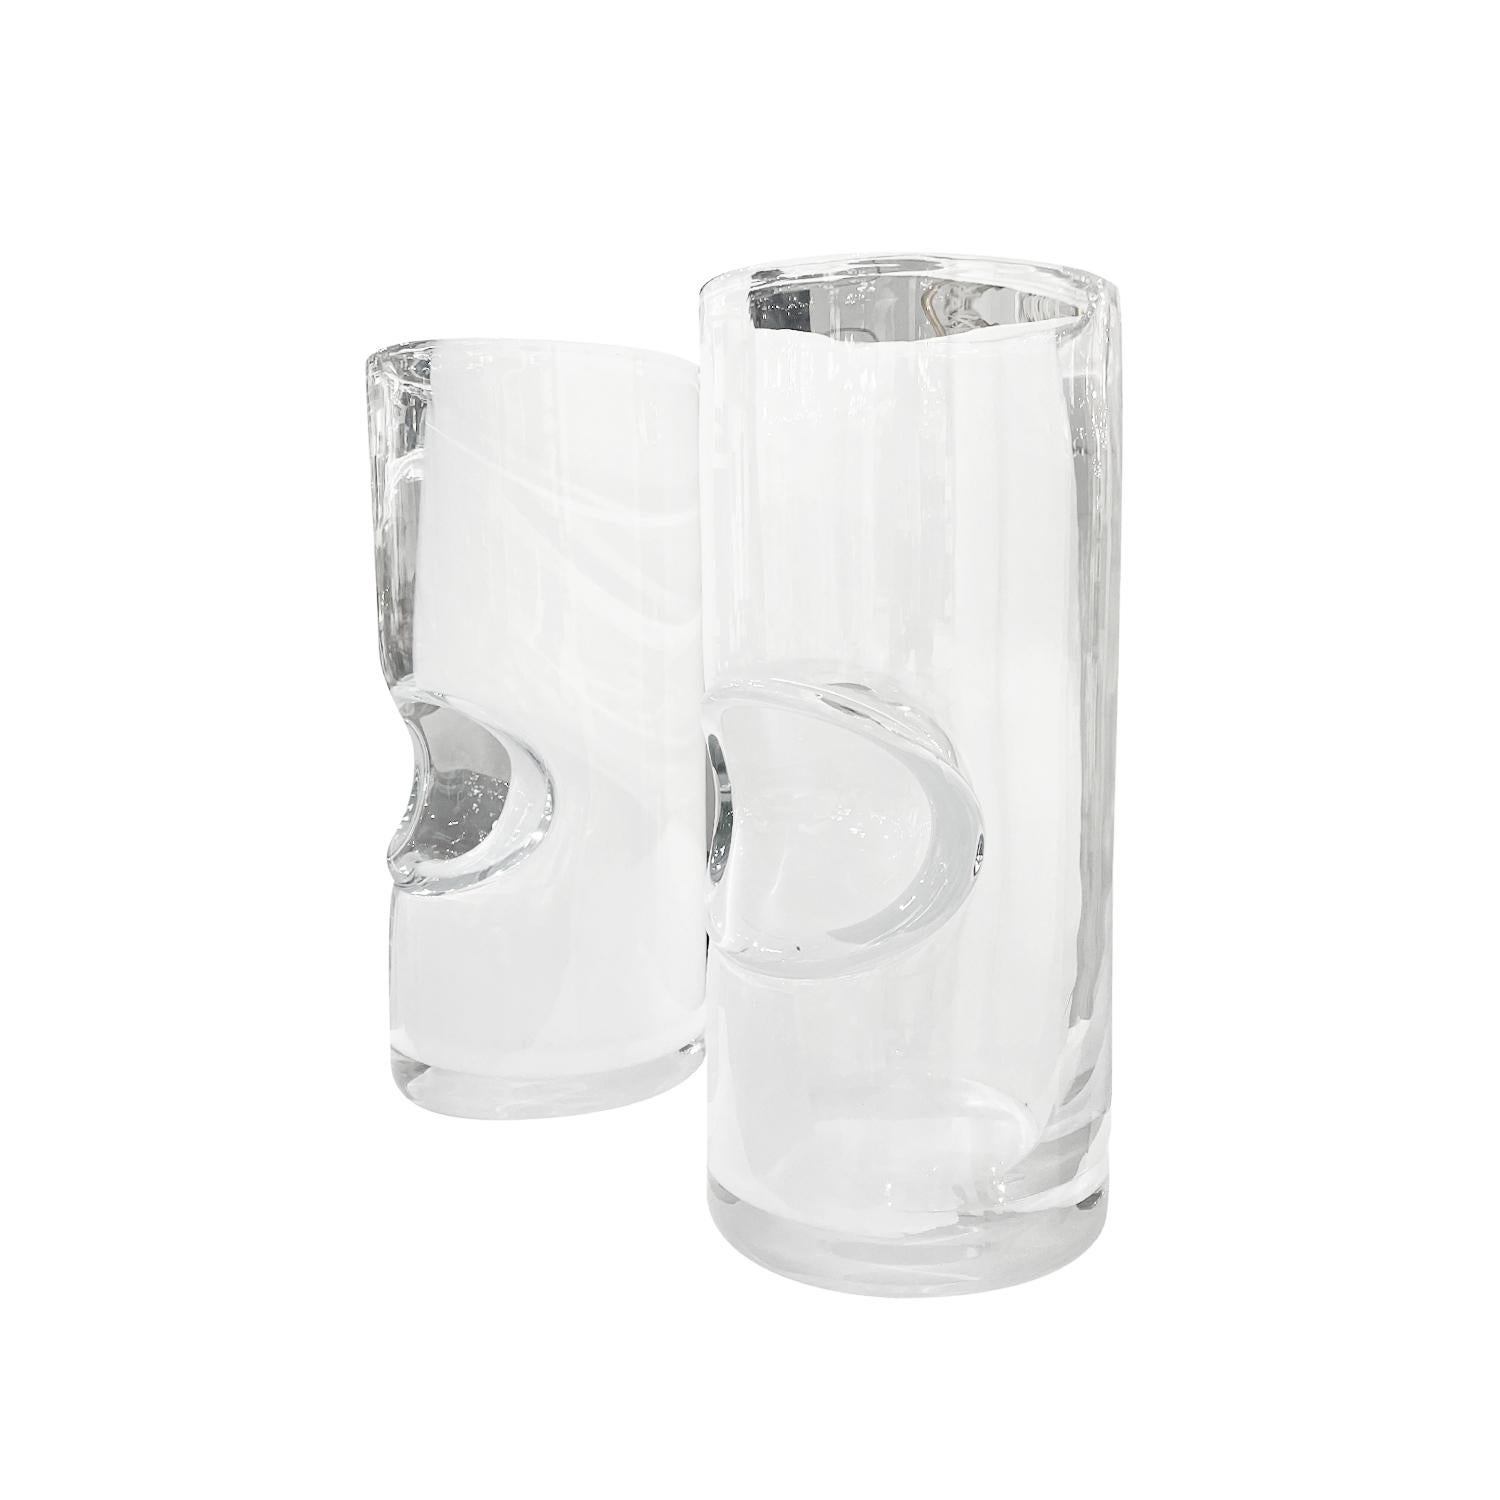 Hand-Crafted 21st Century European Pair of White Infused Glass Vases For Sale